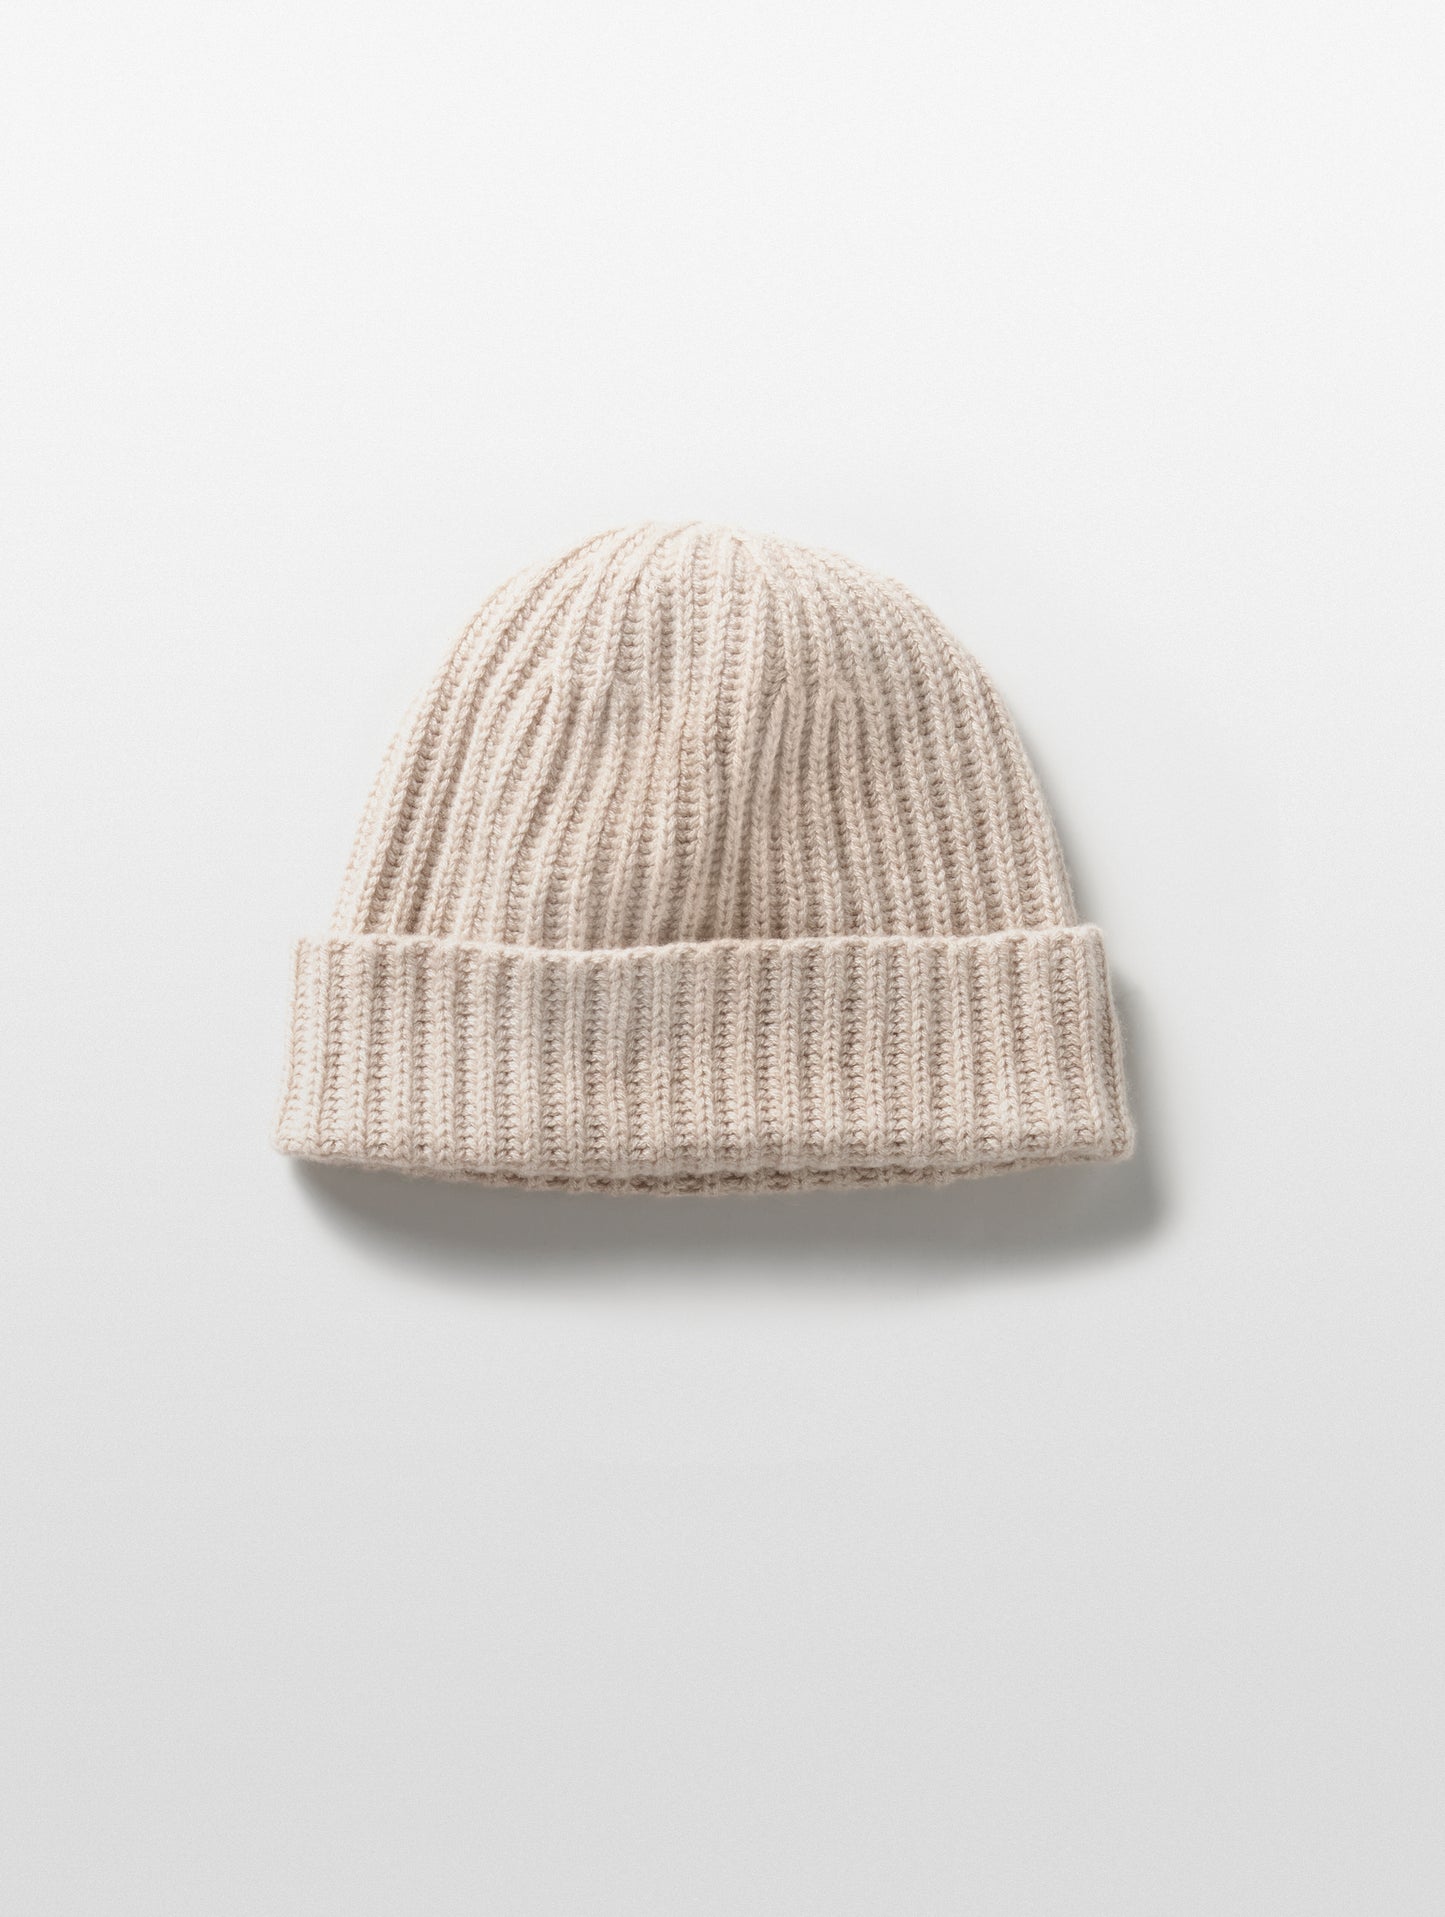 beige cashmere hat from AETHER Apparel